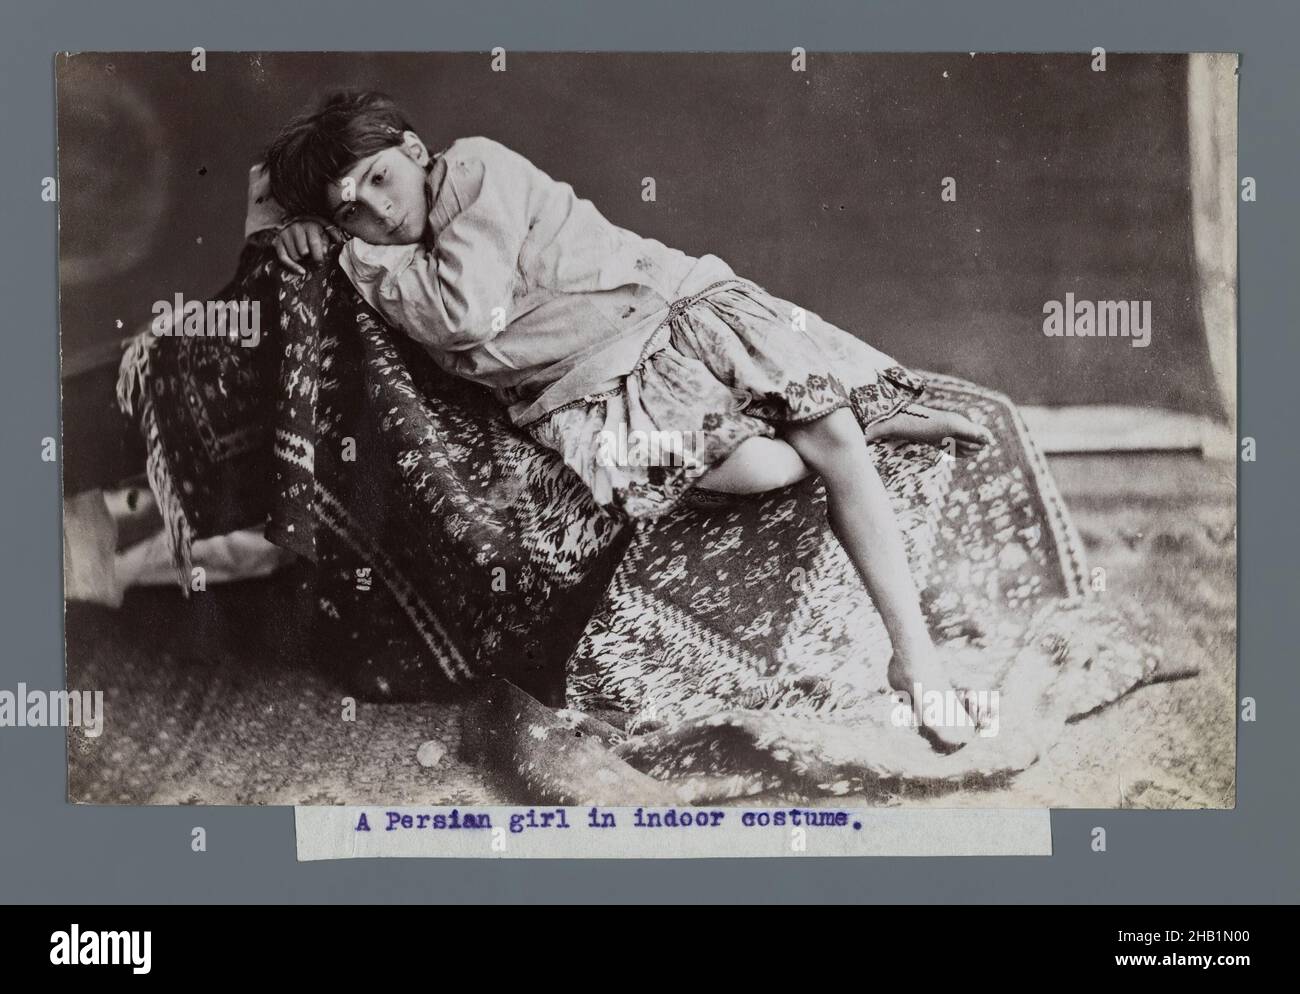 Young Girl Lying Down on Kilim, One of 274 Vintage Photographs, Albumen silver photograph, late 19th-early 20th century, Qajar, Qajar Period, 4 7/8 x 7 5/8 in., 12.4 x 19.3 cm, 19th century, black and white, carpet, child, dress, girl, historical fashion, Iran, Persian, Persian Rug, photograph, photography, rug Stock Photo